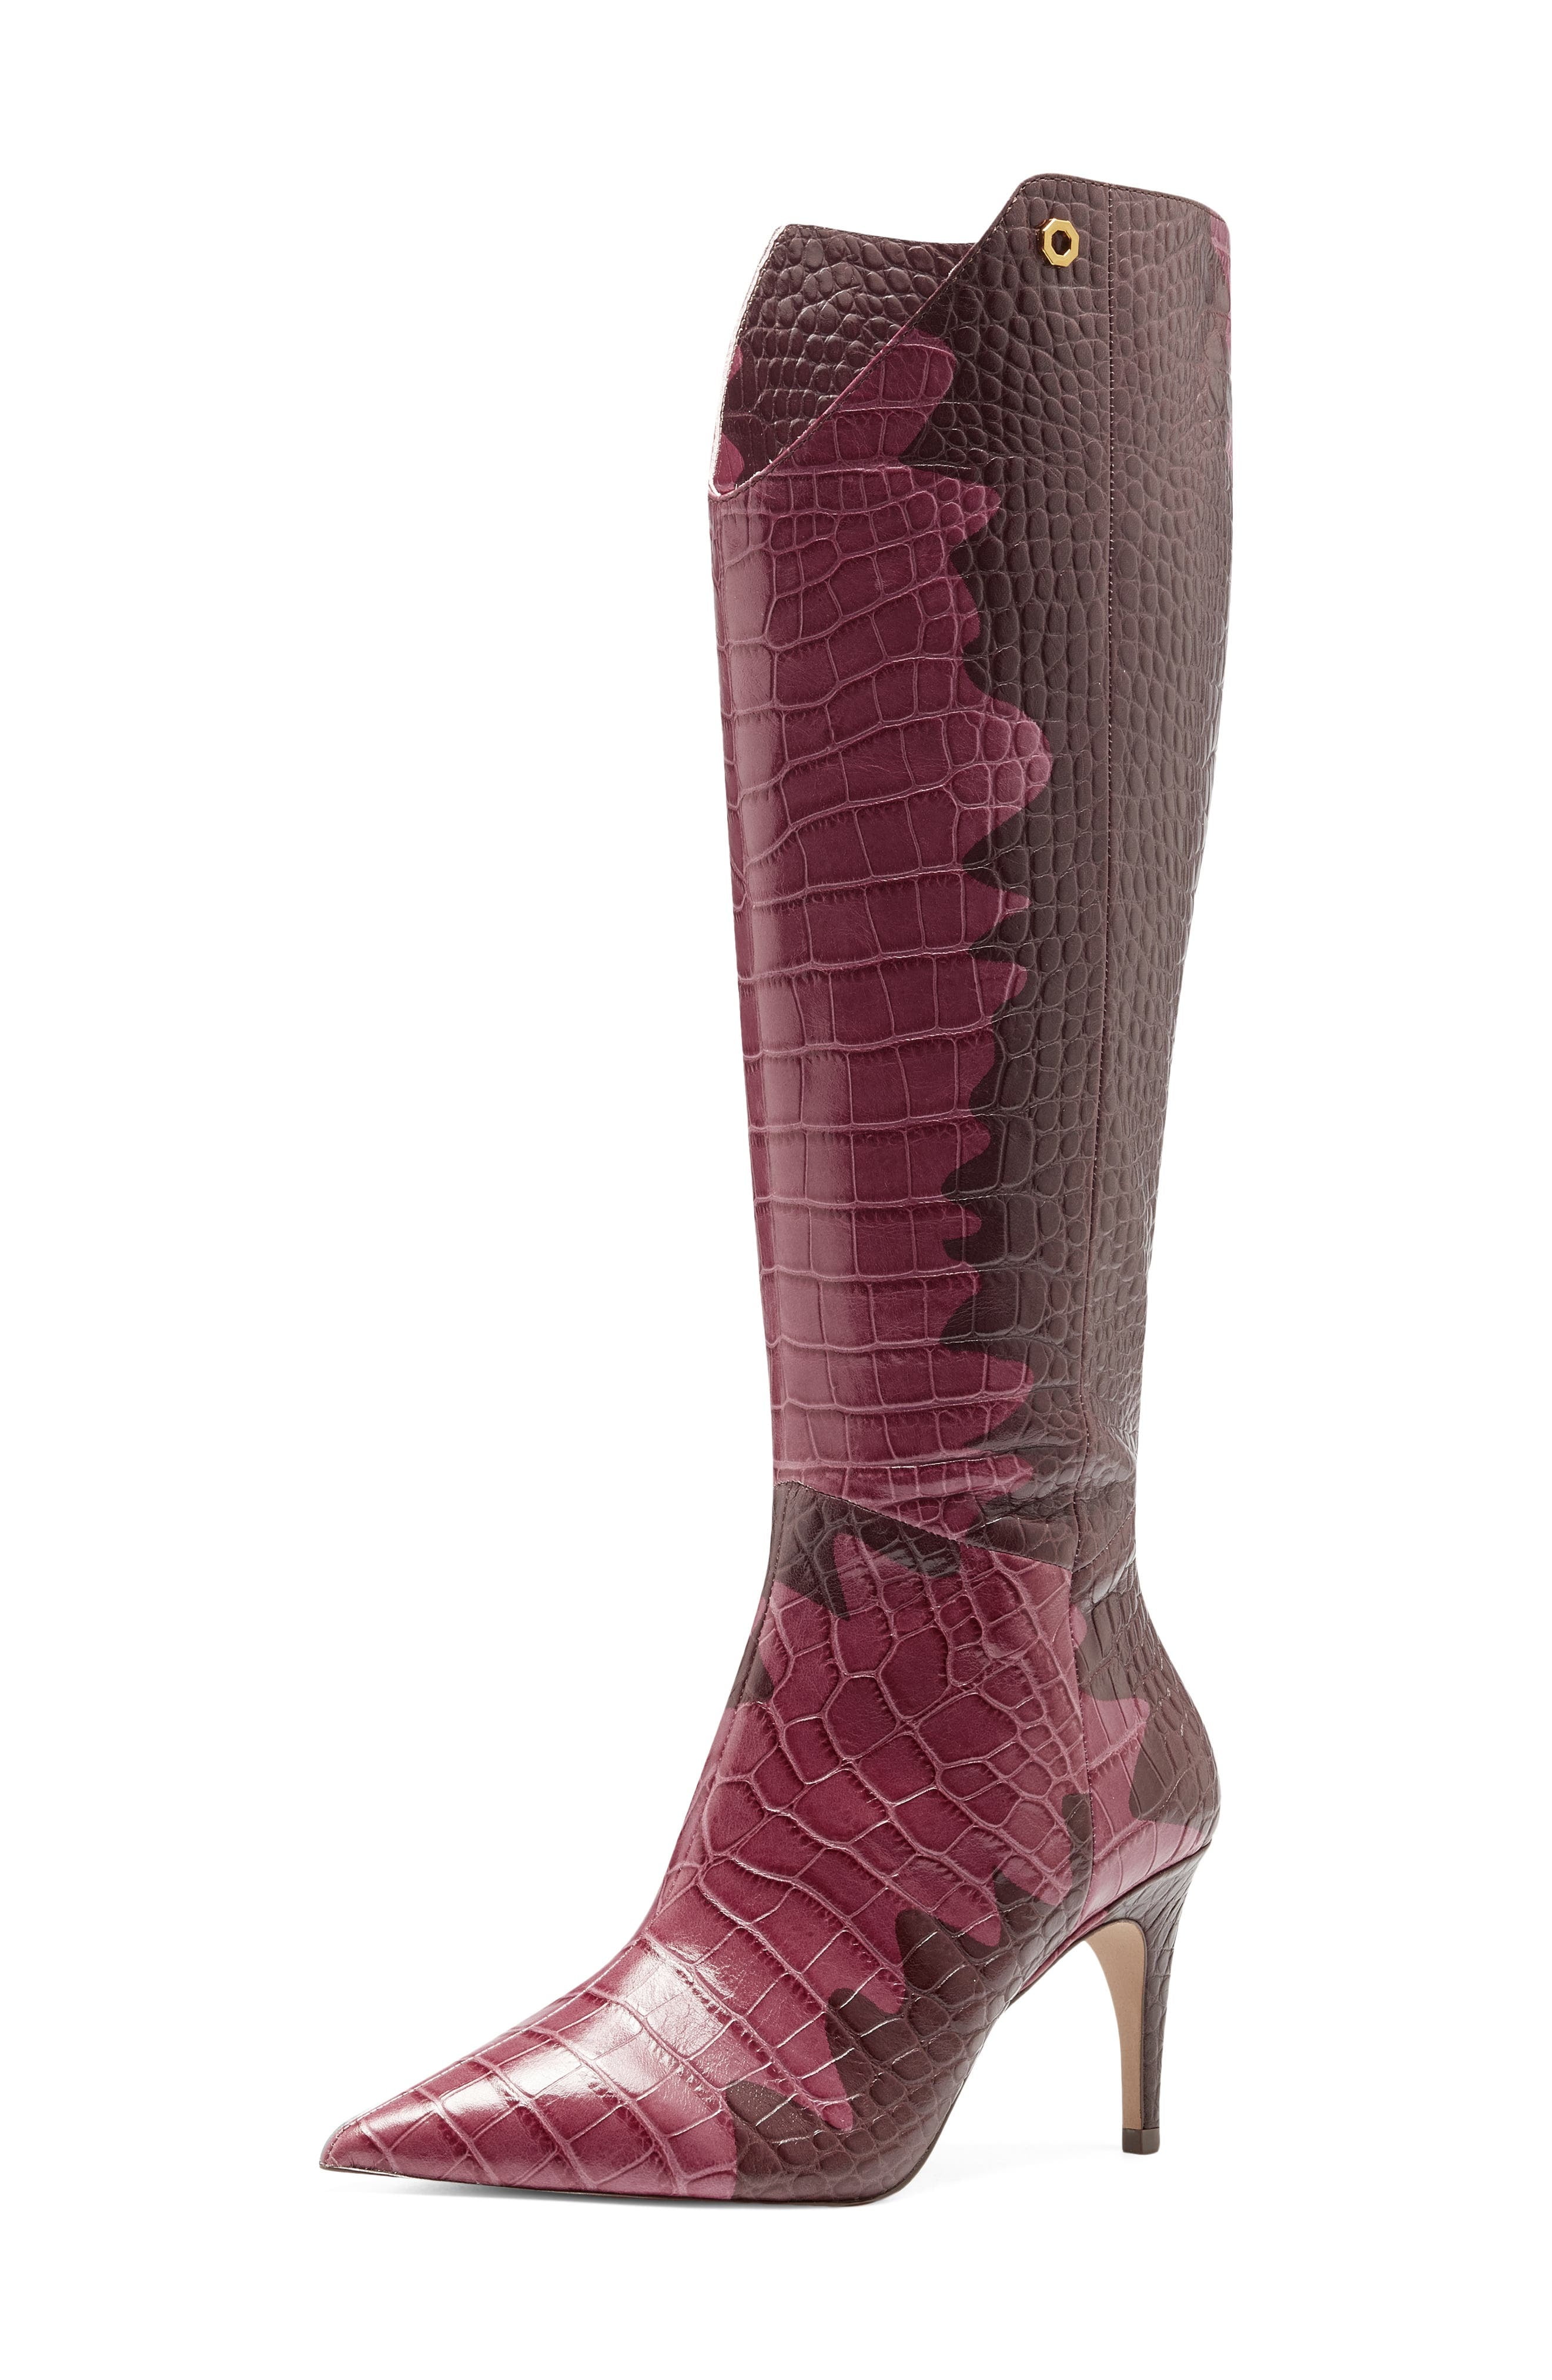 Louise et Cie Kamil Leather Pointed Toe Tall Shaft Boots Flame Red Snake  Boots (PINK MULTI, 7) 